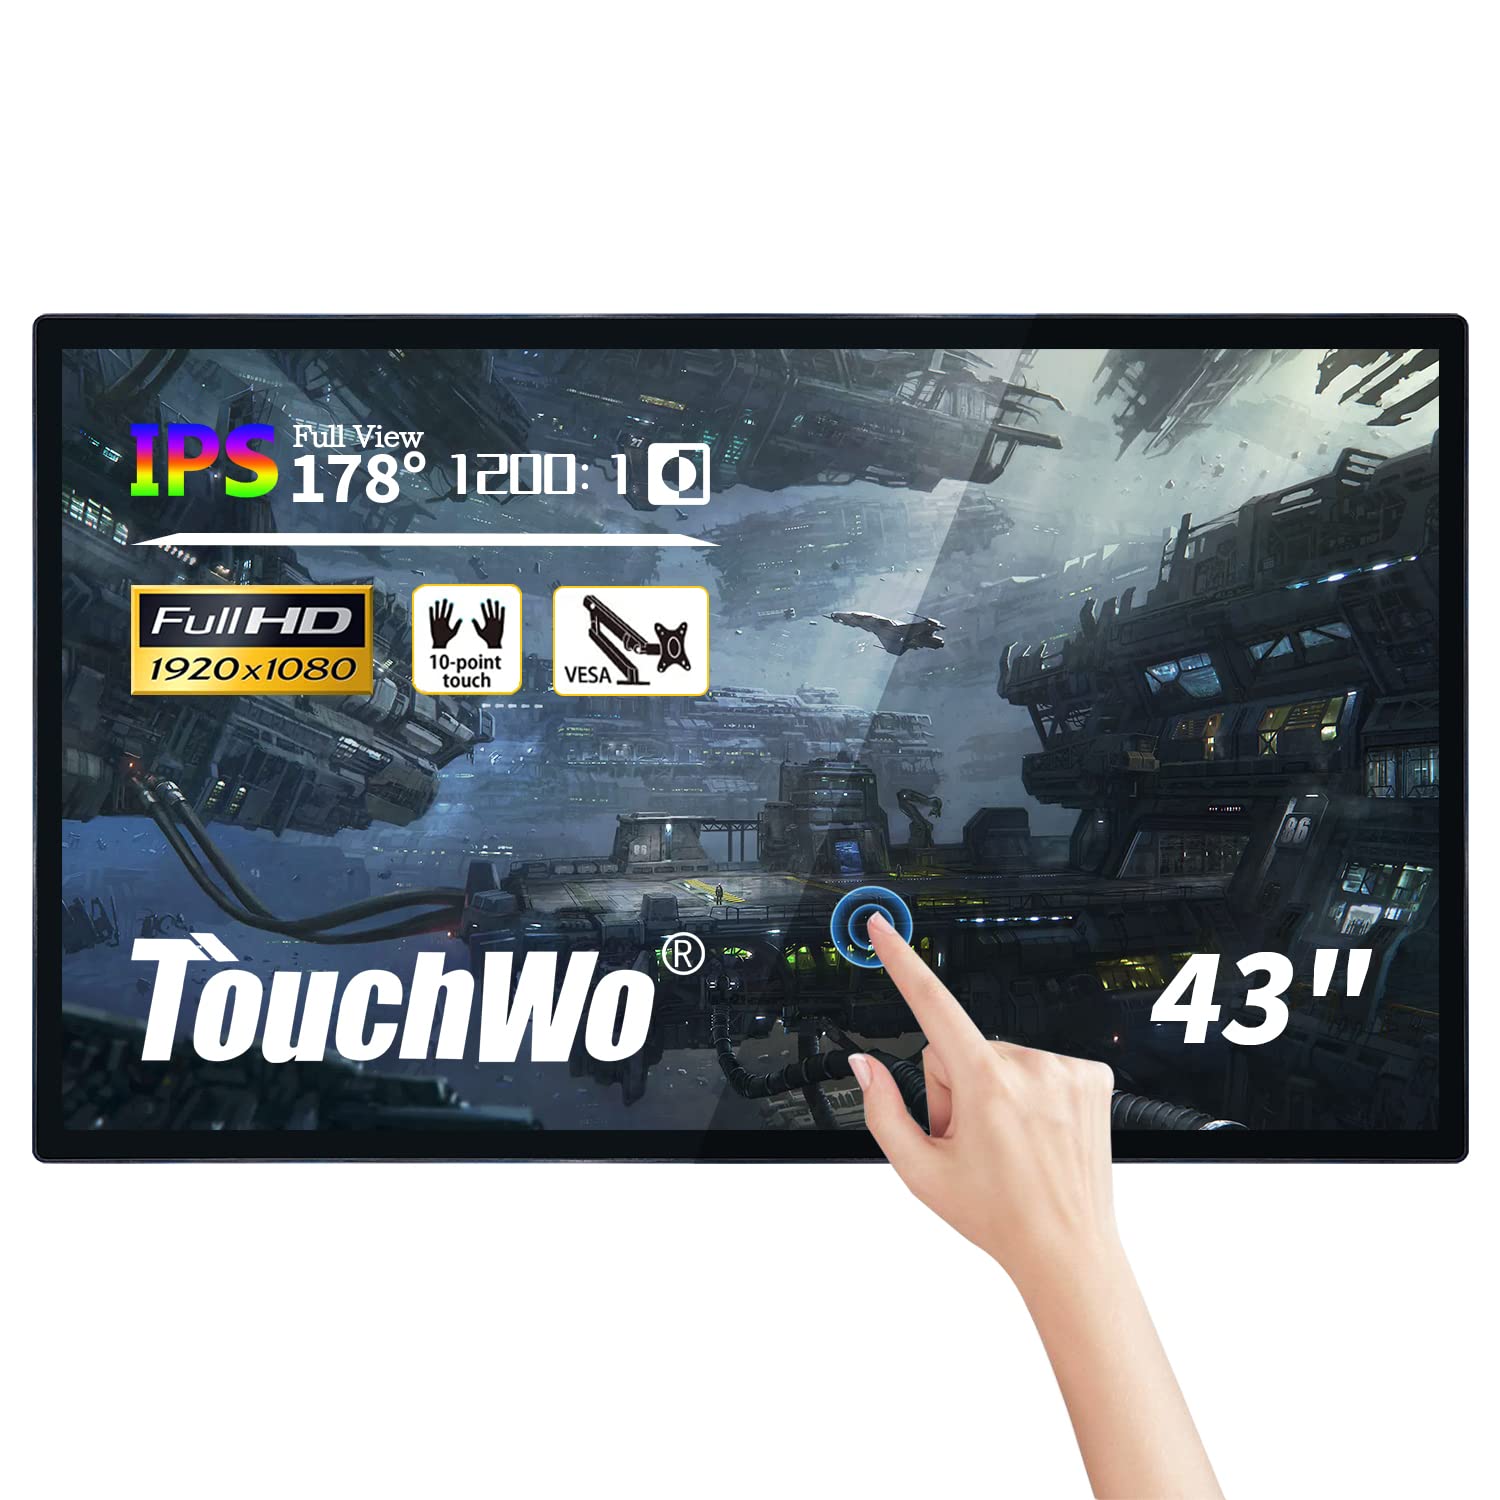 TouchWo 43 inch Touchscreen Smart Board, 16:9 FHD 1080P Interactive Board & Smart TV, Windows 10 All-in-One PC for Industrial, Office and Classroom, Vertical Monitor Screen